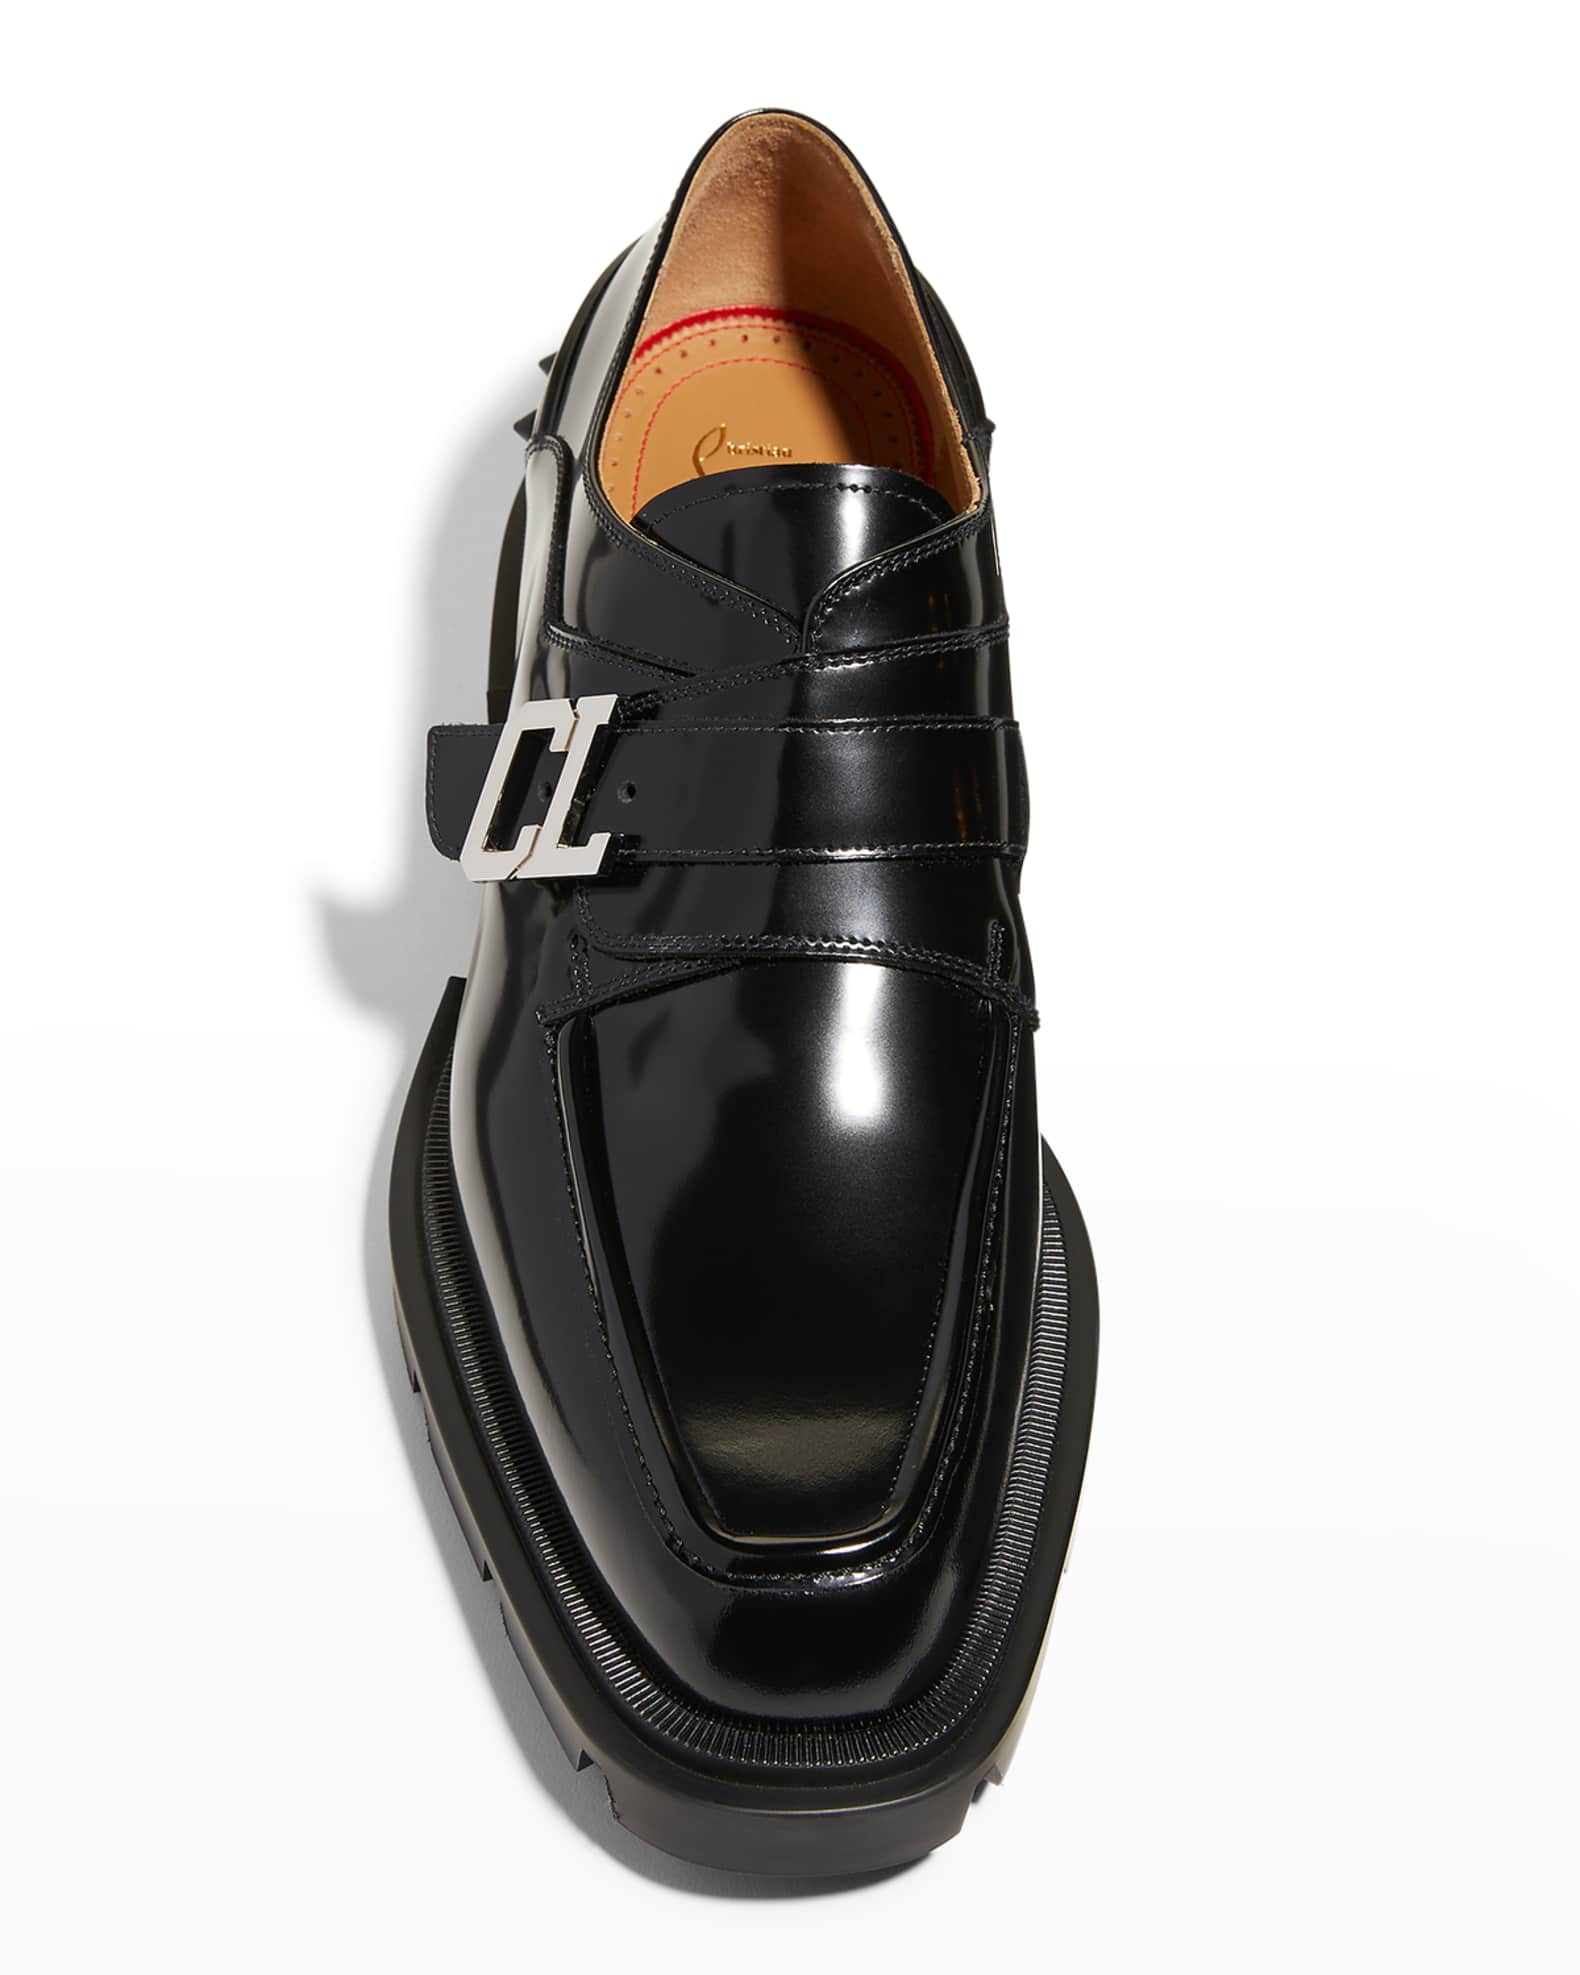 Christian Louboutin Our Georges L Black